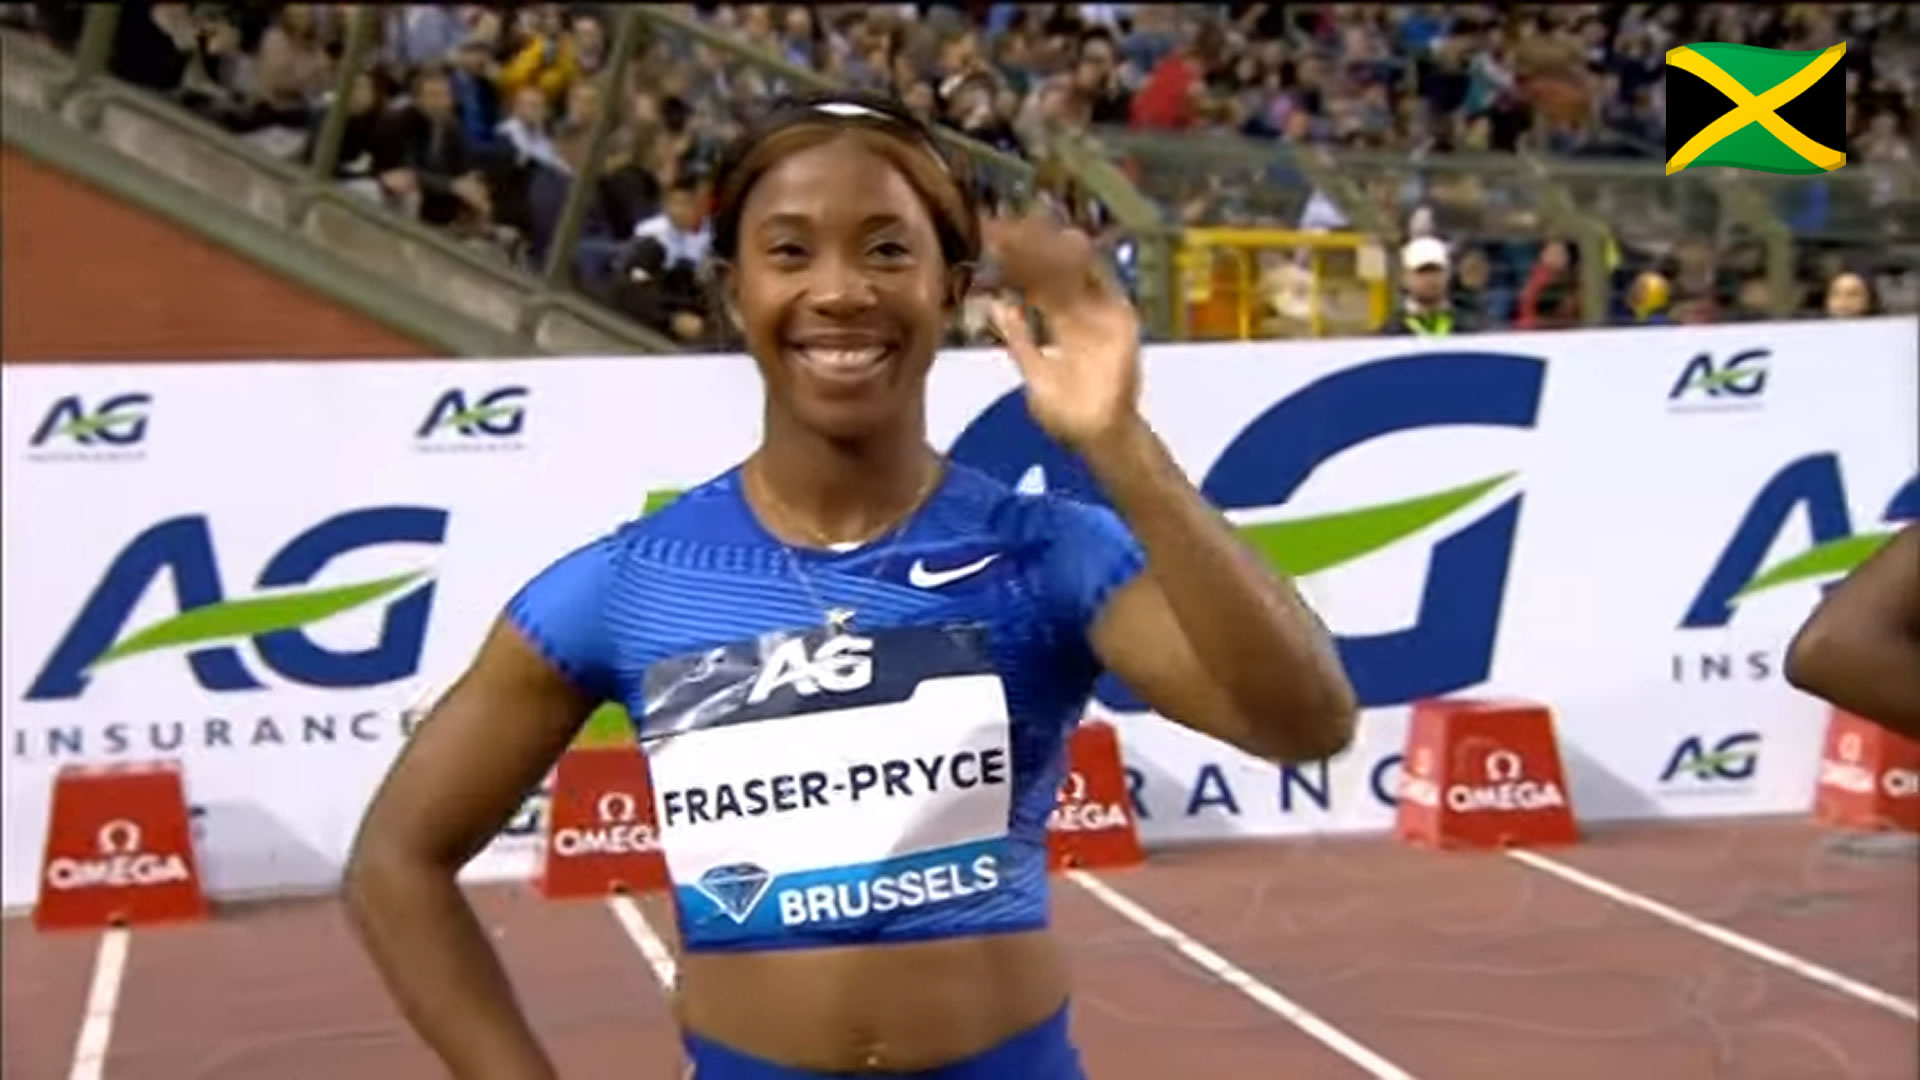 Shelly-Ann Fraser-Pryce finishes 2nd in Brussels Diamond League 100m